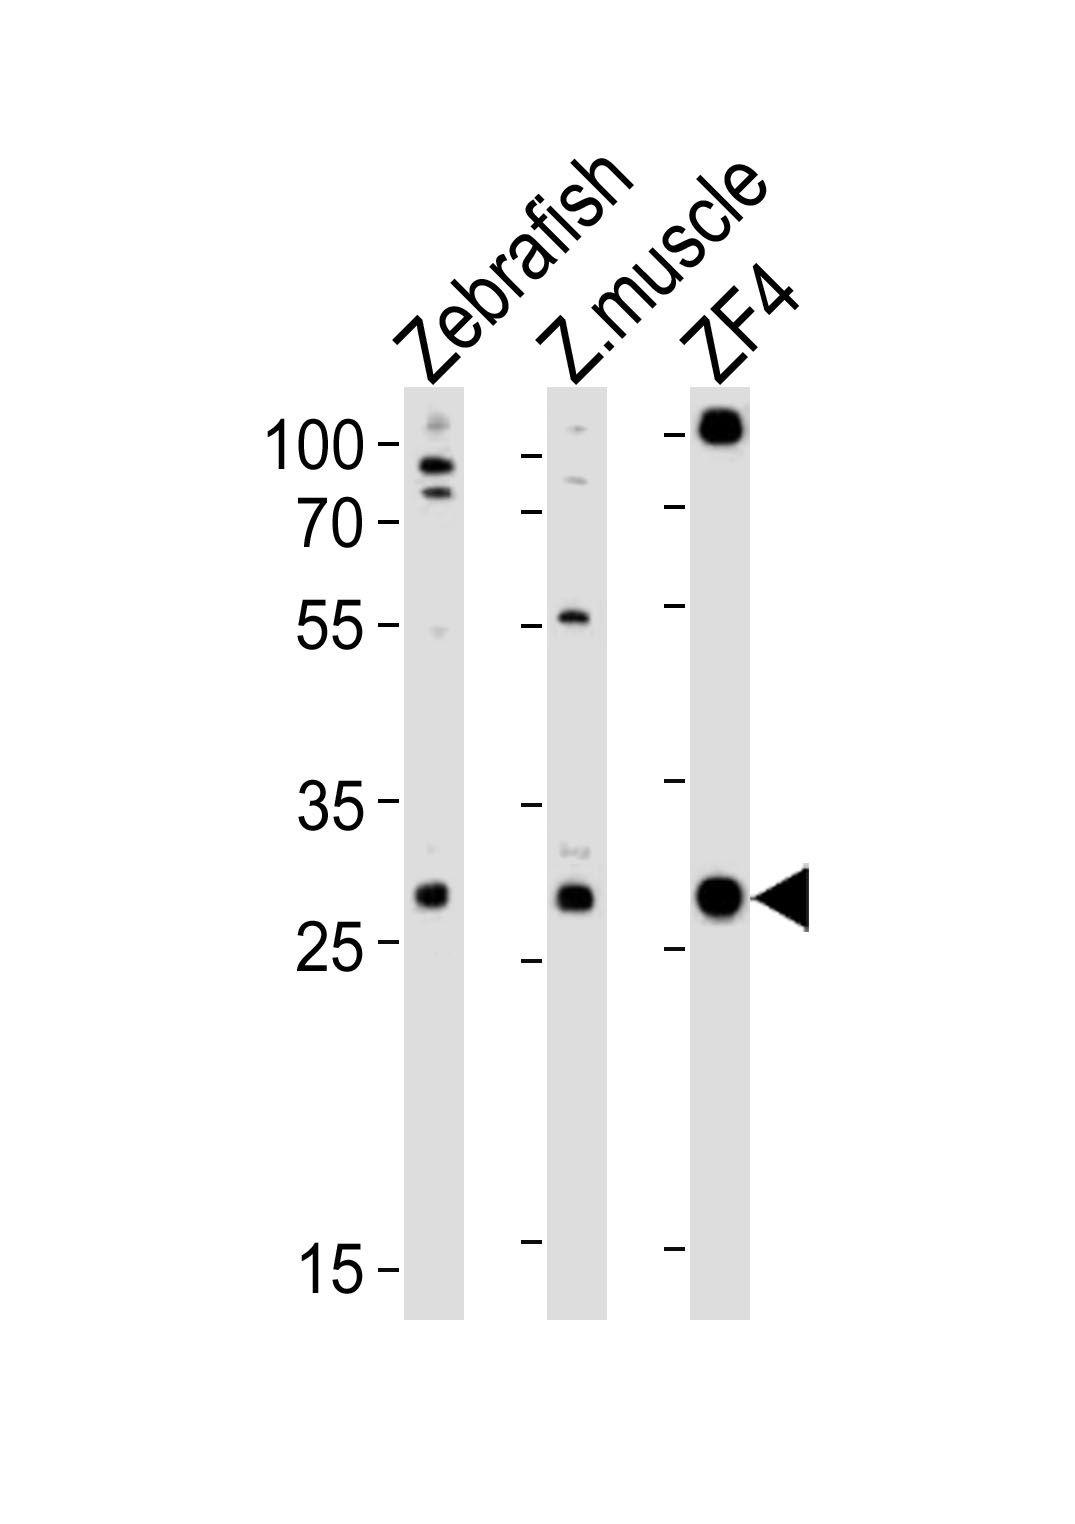 Western blot analysis of lysates from Zebrafish, zebra fish muscle tissue lysate, ZF4 cell line (from left to right),  using (DANRE) ak2 Antibody (N-term)(Cat. #Azb18720b).  Azb18720b was diluted at 1:1000 at each lane. A goat anti-rabbit IgG H&L(HRP) at 1:10000 dilution was used as the secondary antibody. Lysates at 20ug per lane.